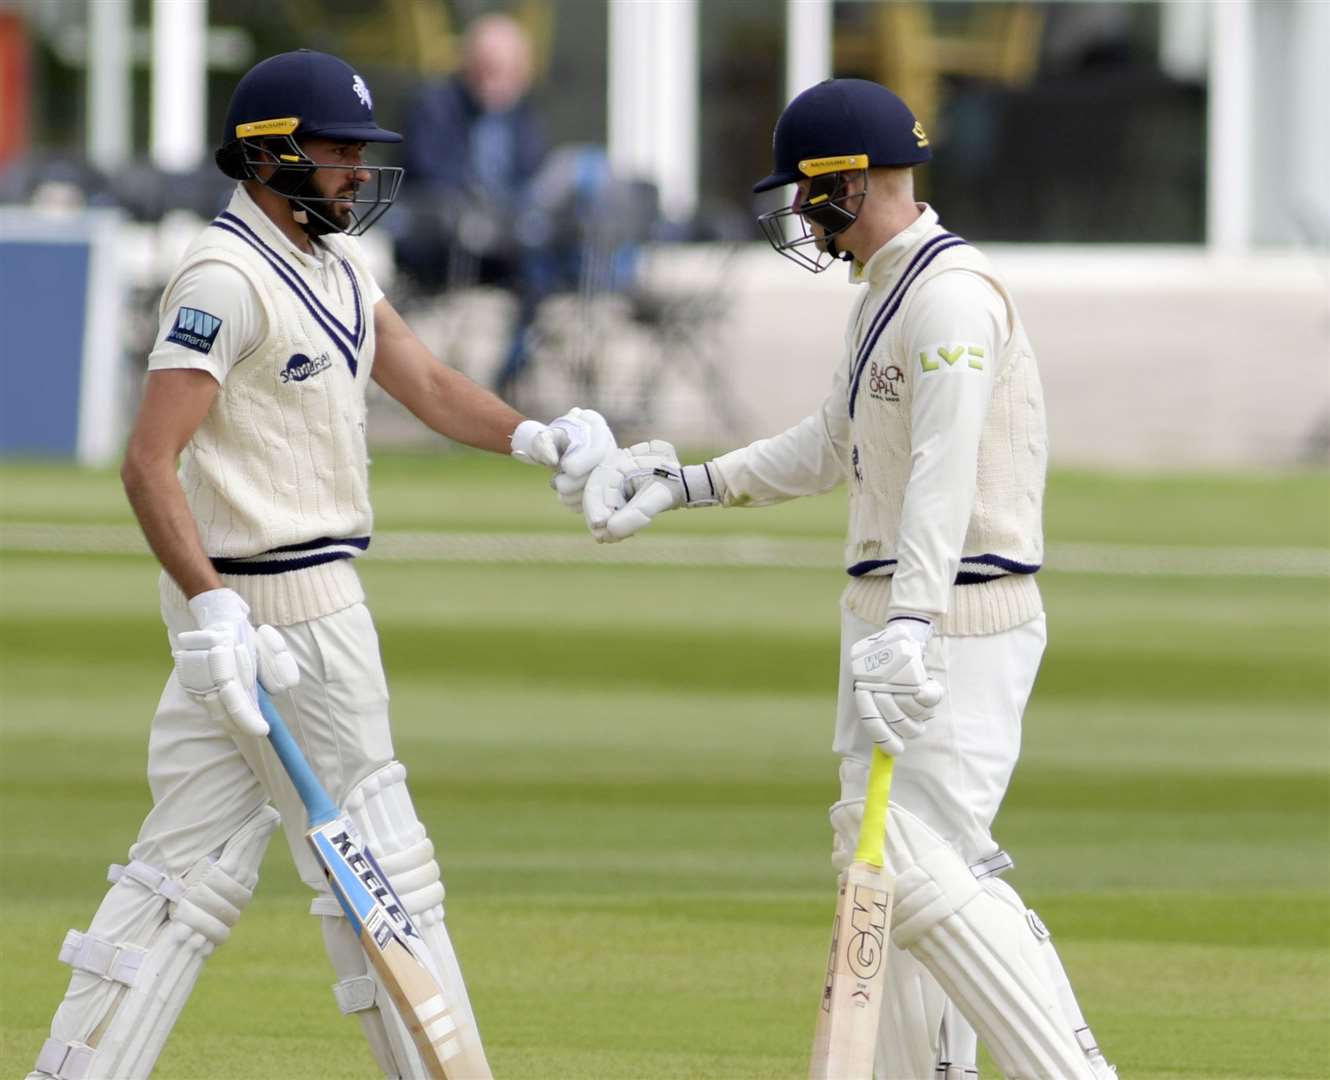 Jack Leaning and Jordan Cox batting together against Glamorgan this year - the pair put on a record-breaking 423-run partnership last year. Picture: Barry Goodwin